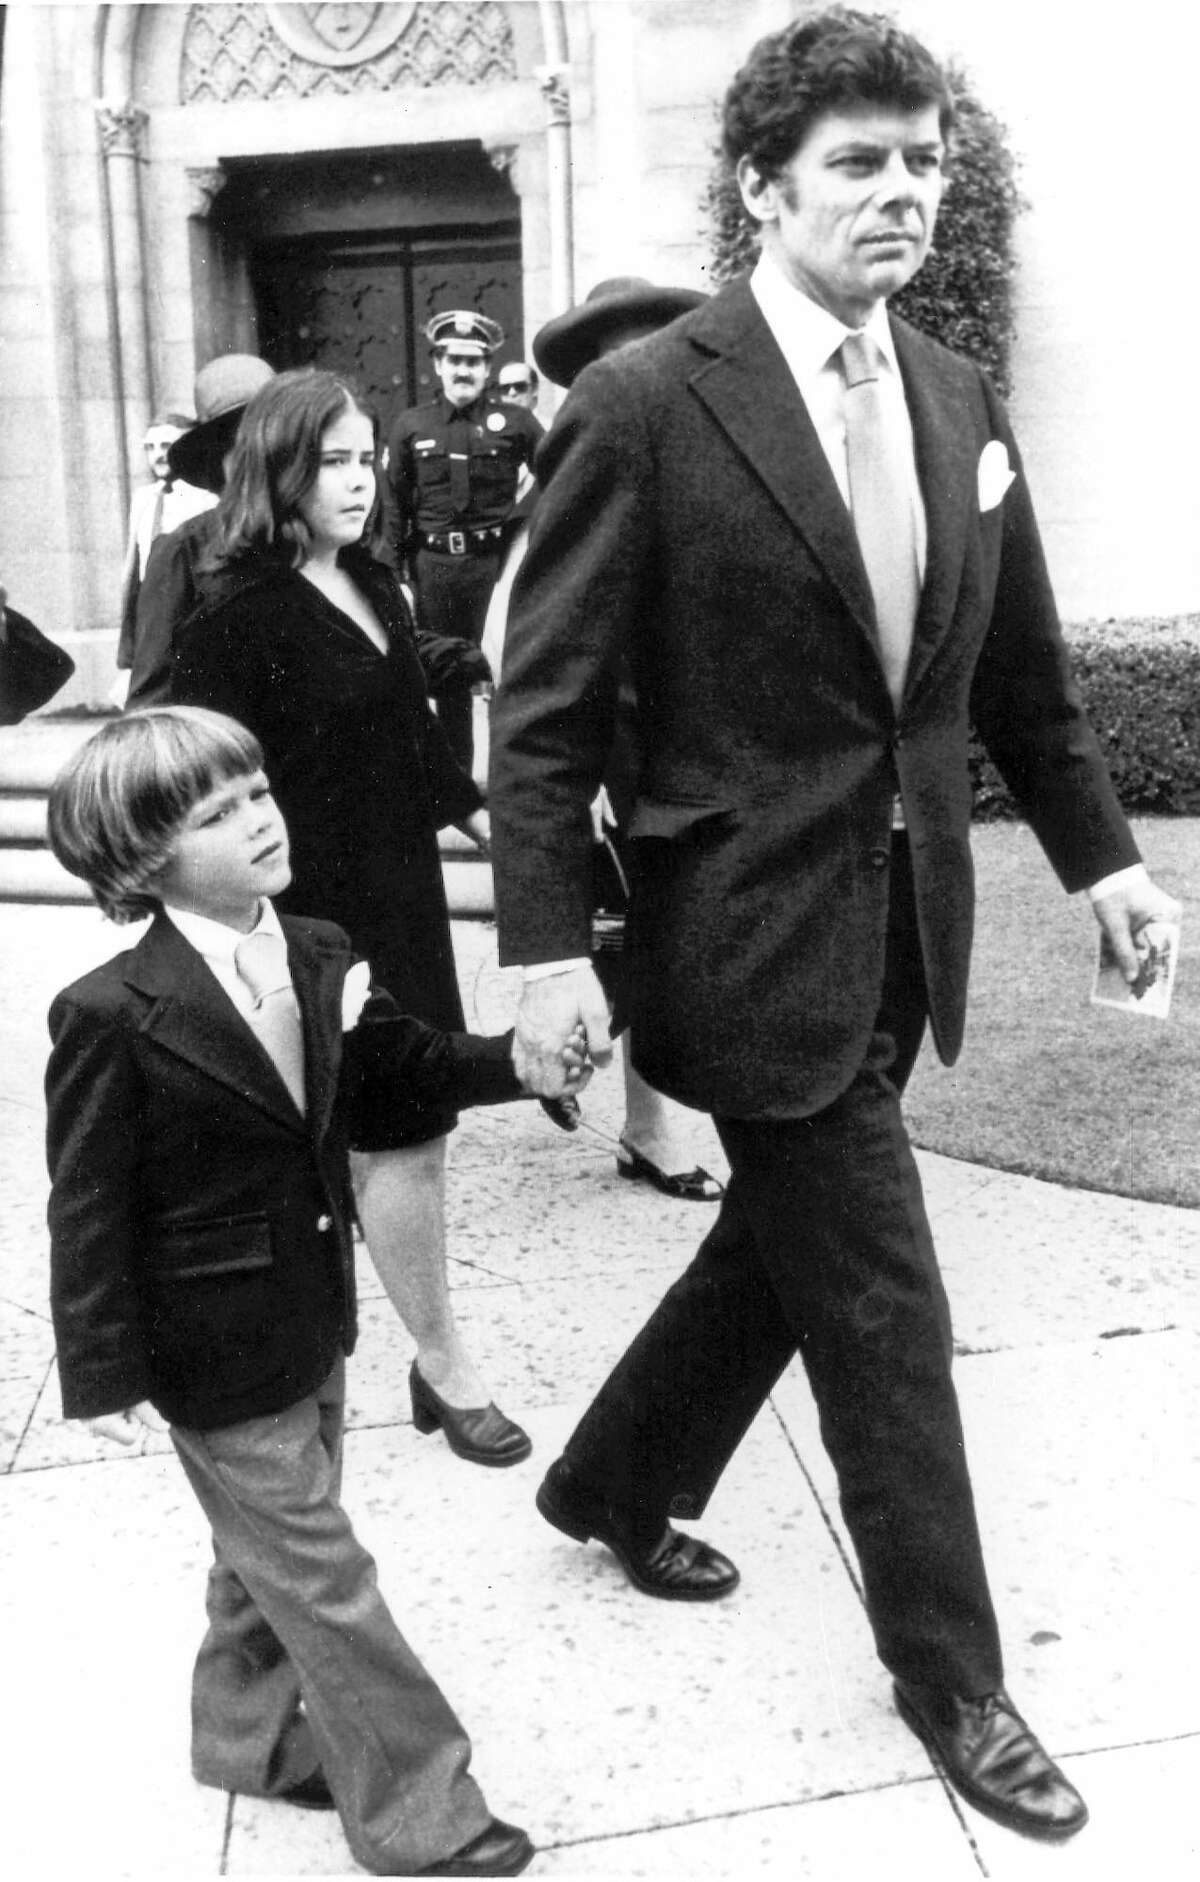 FILE - In this June 10, 1976 file photo, Gordon Getty with his son Andrew leaves the Wilshire United Methodist church after memorial services for J. Paul Getty, in Los Angeles. A man has been found dead at the Hollywood Hills home of Andrew Getty, grandson of the late J. Paul Getty and heir to the Getty oil fortune - but they havenít confirmed that it is Getty. Los Angeles police Officer Jack Richter says officers went to the home shortly after 2:15 p.m. Tuesday, March 31, 2015, after a woman called to say someone in the house had died. (AP Photo/File)